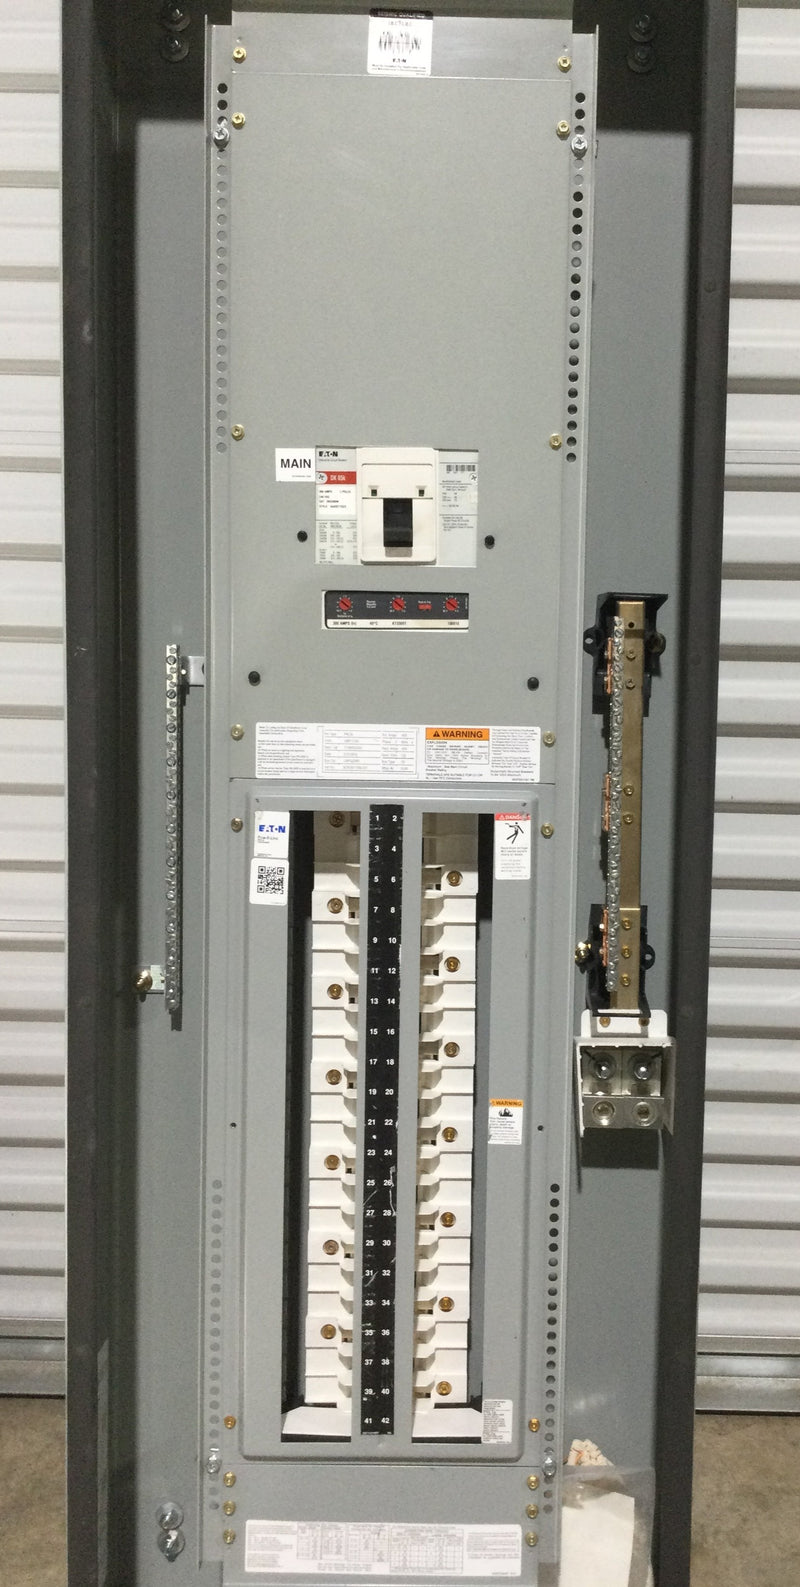 Eaton/Cutler-Hammer: (PRL2A/42), 400A Max, 208Y/120V, 3Ph/ 4 Wire, 42 Circuit, 300A Main Breaker Included, Trip